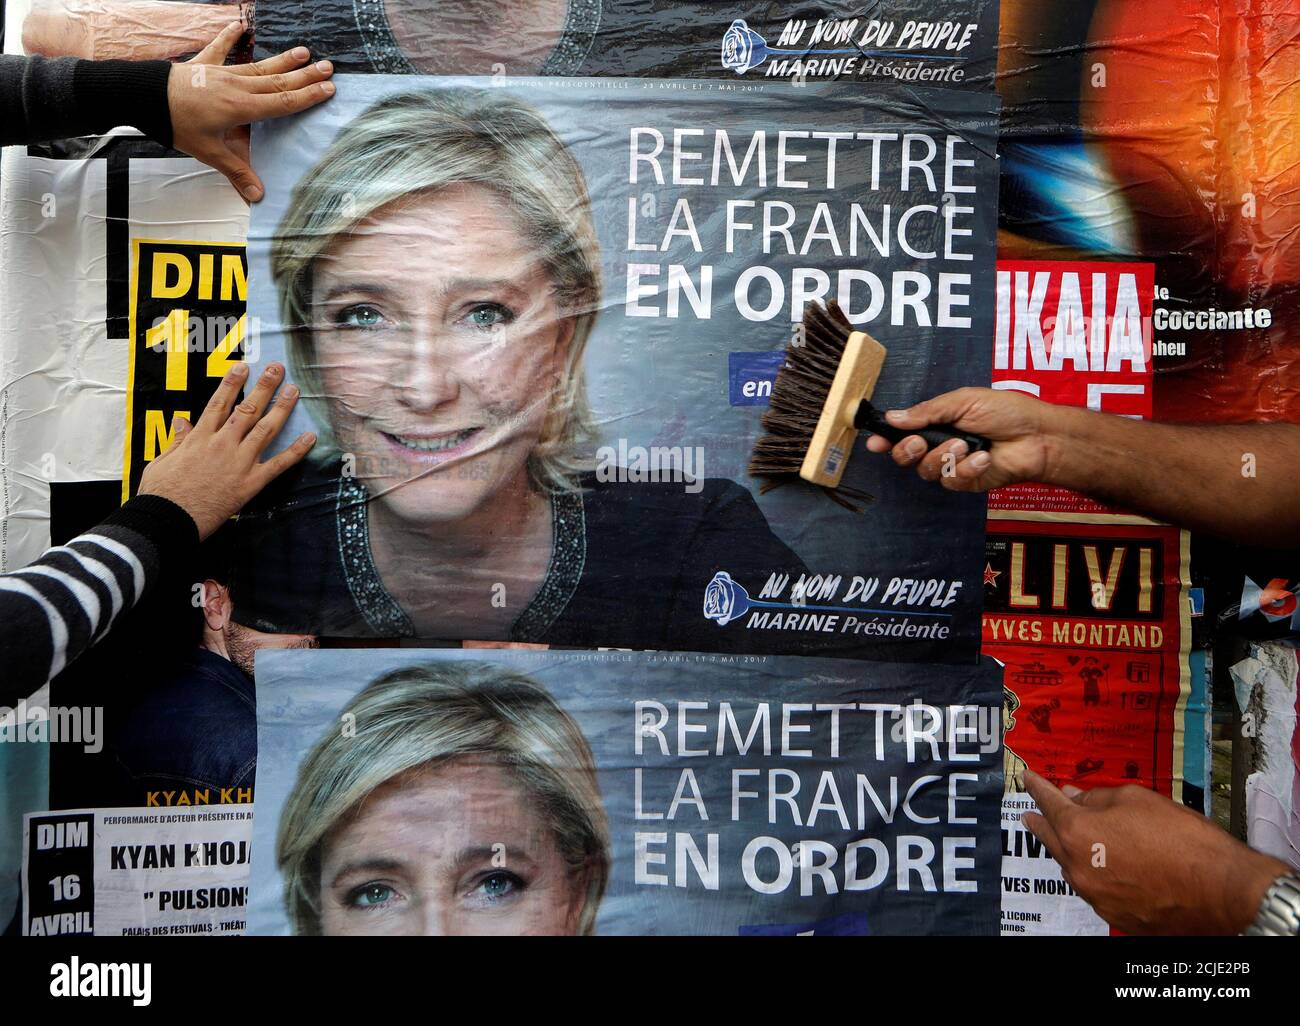 Members of the French National Front (FN) political party paste a poster on  a free billboard for French National Front (FN) political party leader  Marine Le Pen as part of the 2017